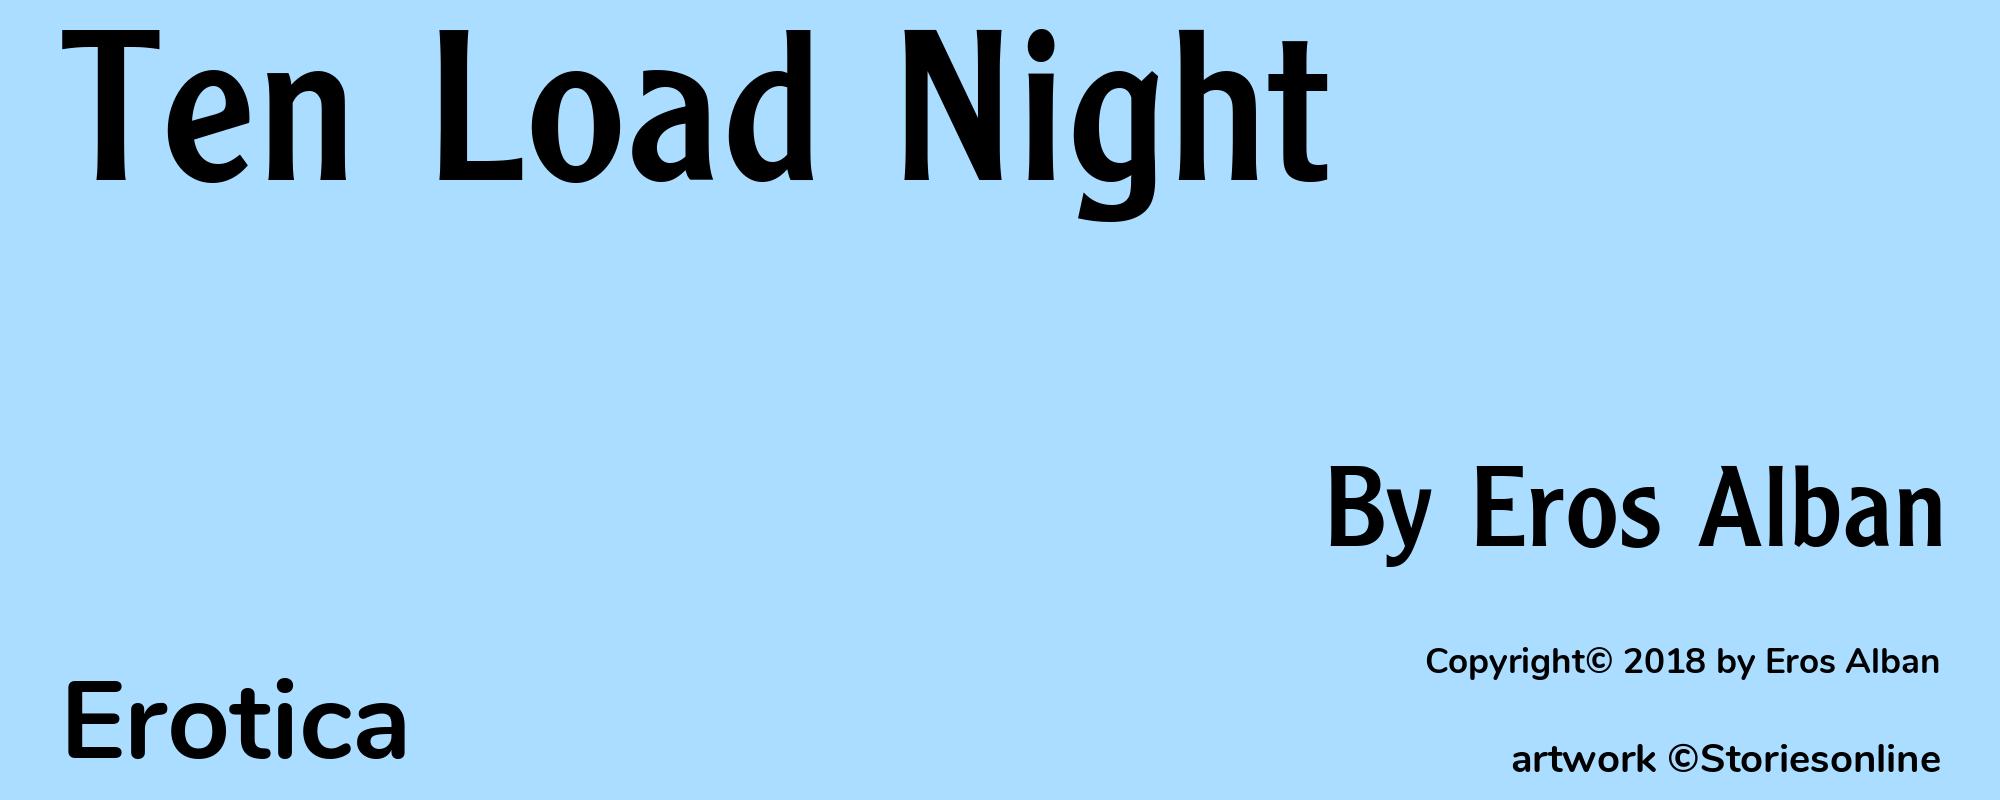 Ten Load Night - Cover